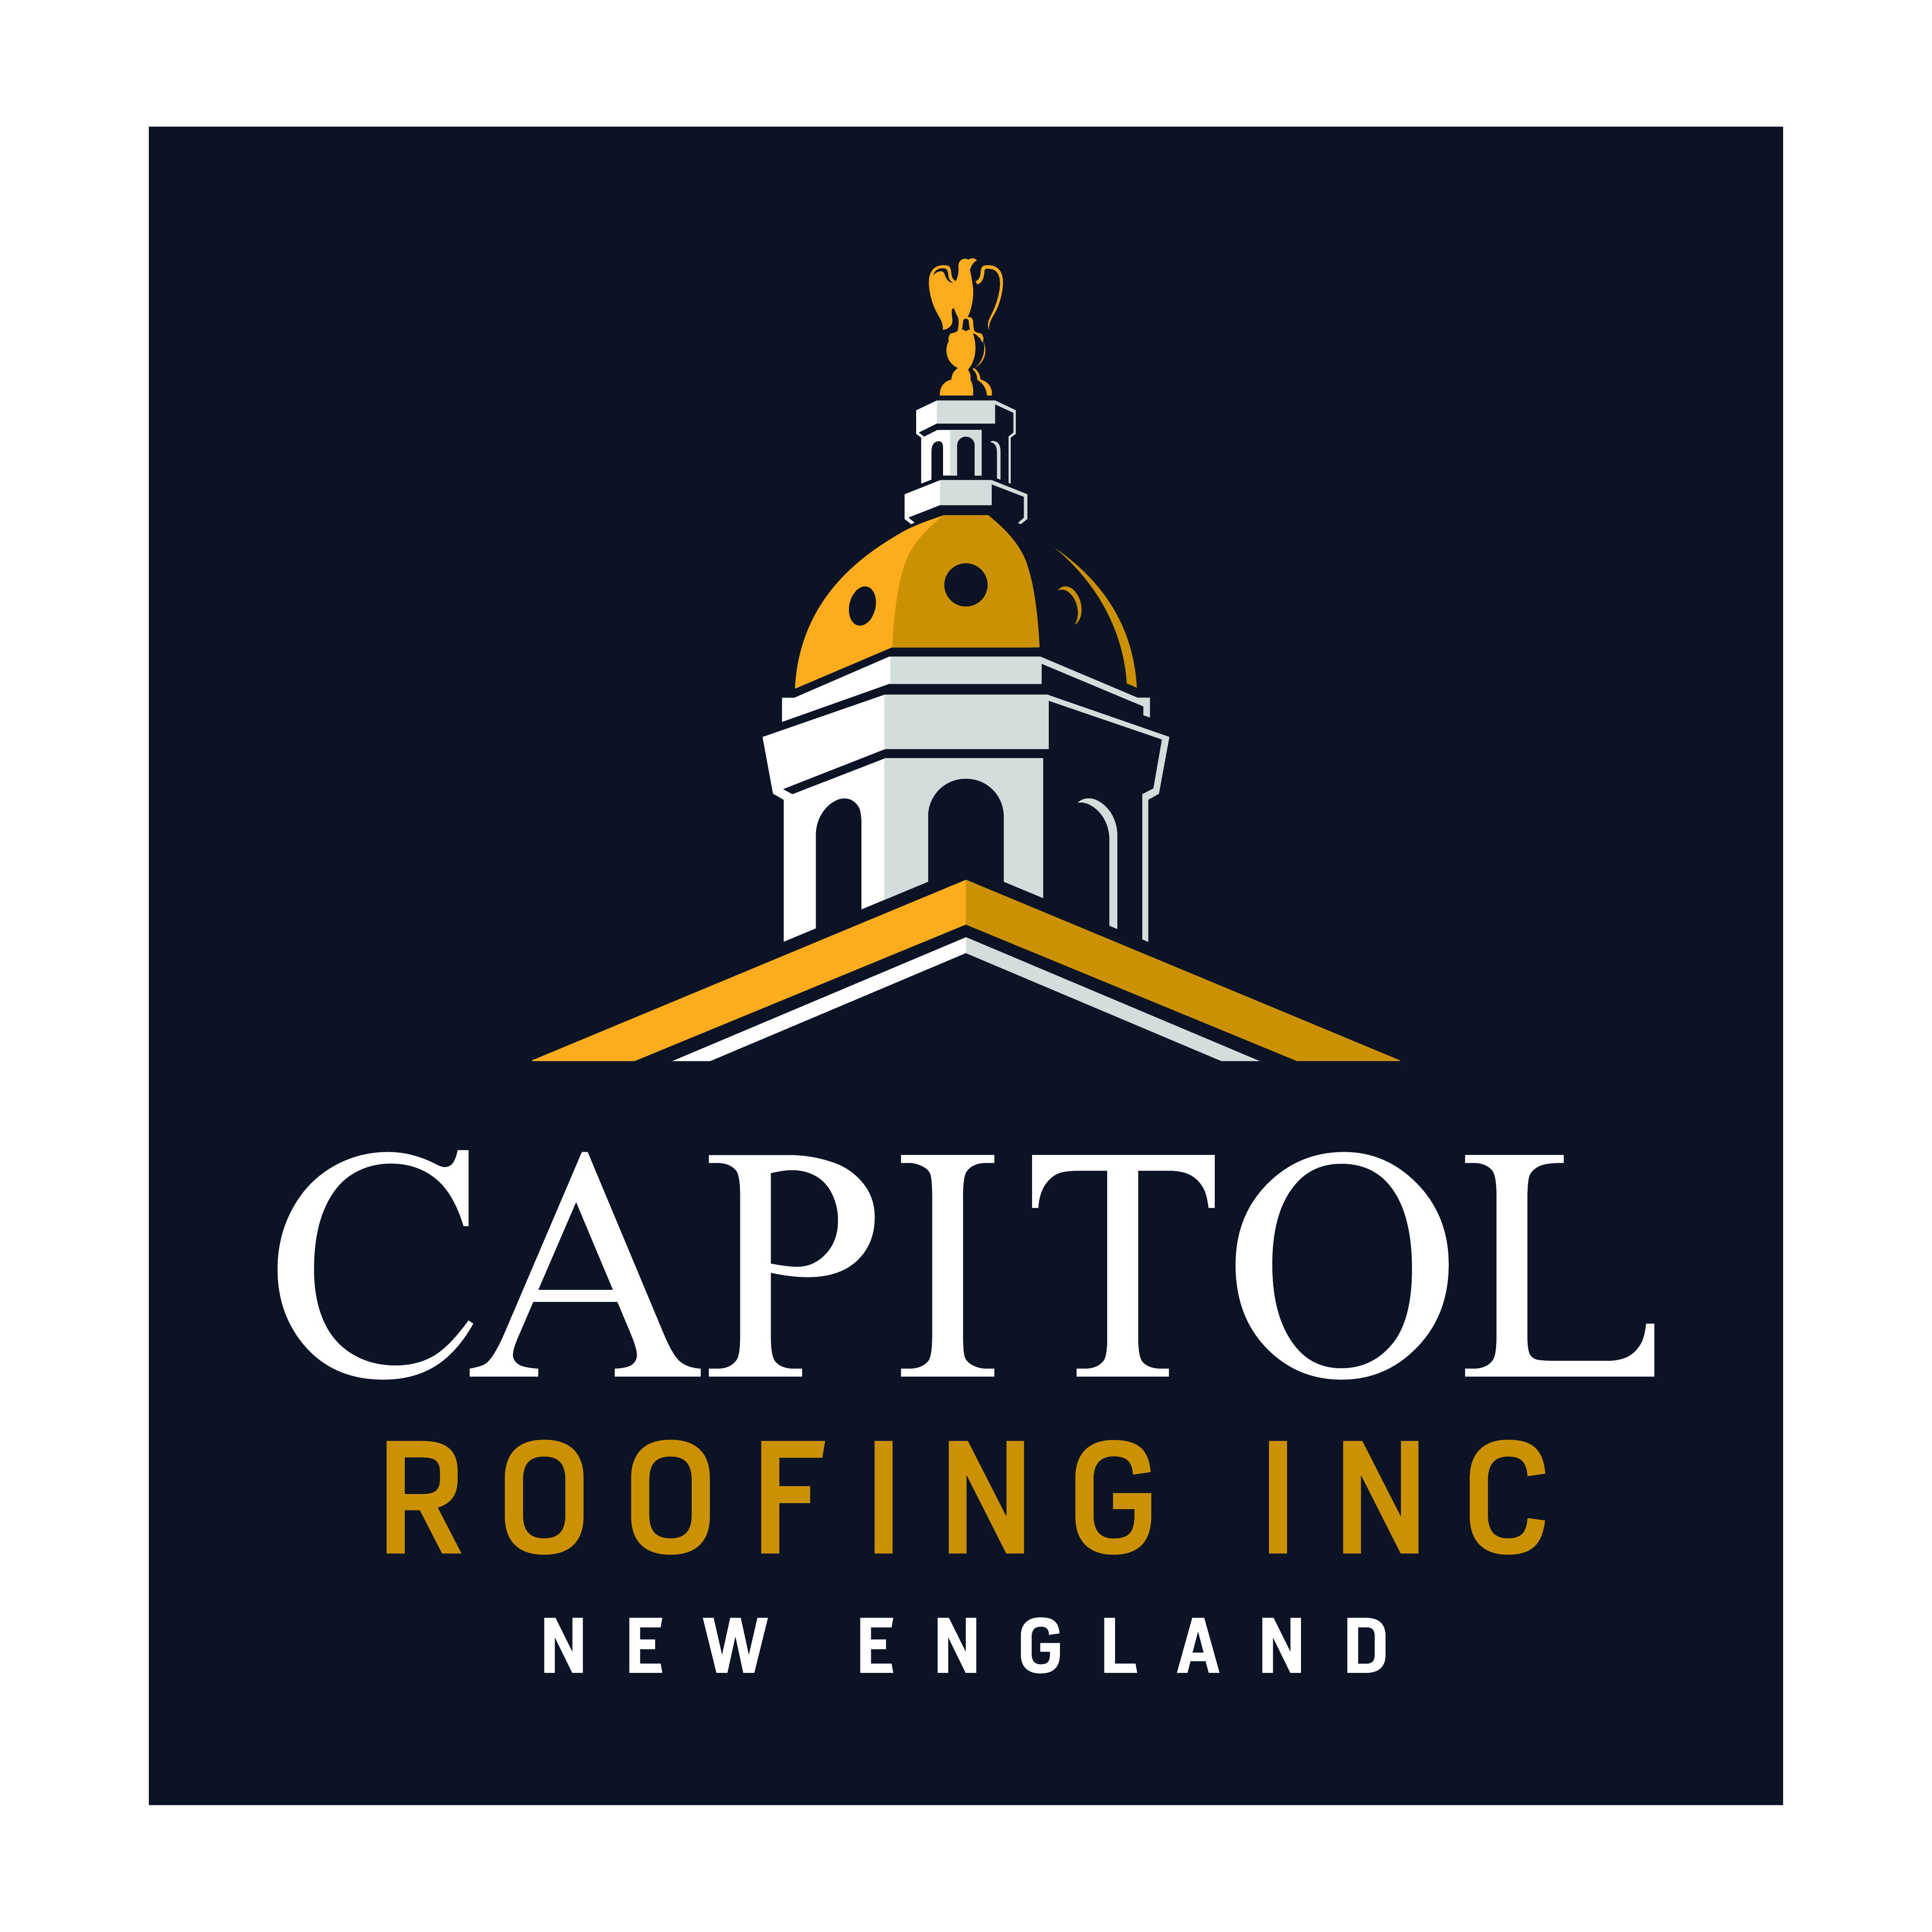 Capitol Roofing, Inc. Logo